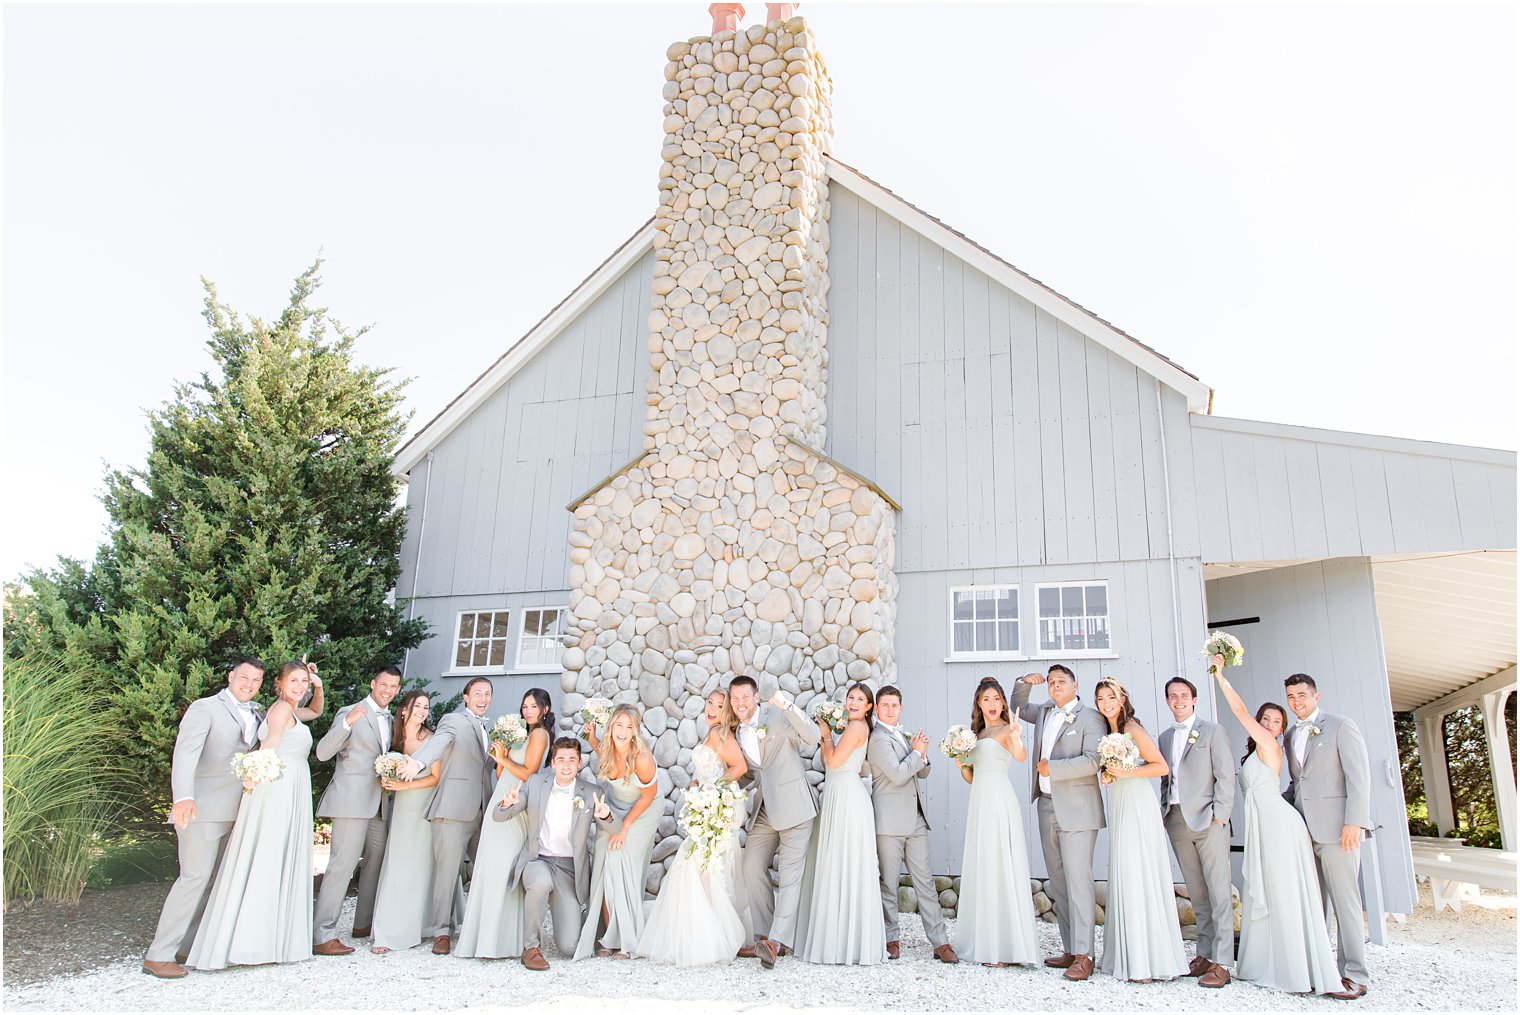 newlyweds cheer with wedding party outside Bonnet Island Estate barn